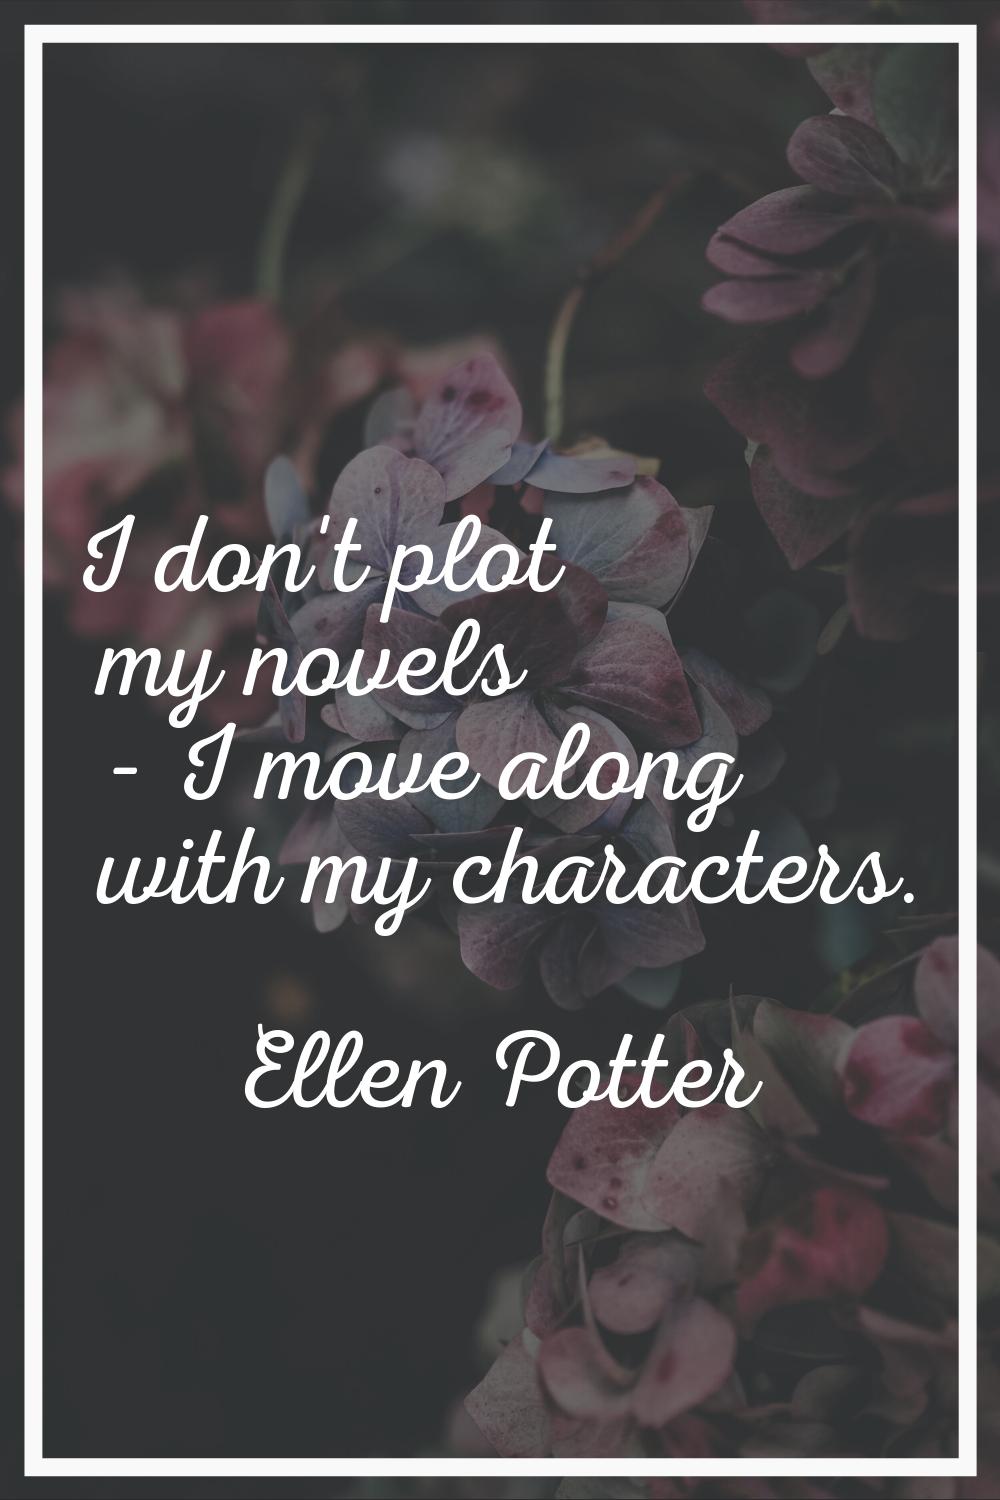 I don't plot my novels - I move along with my characters.